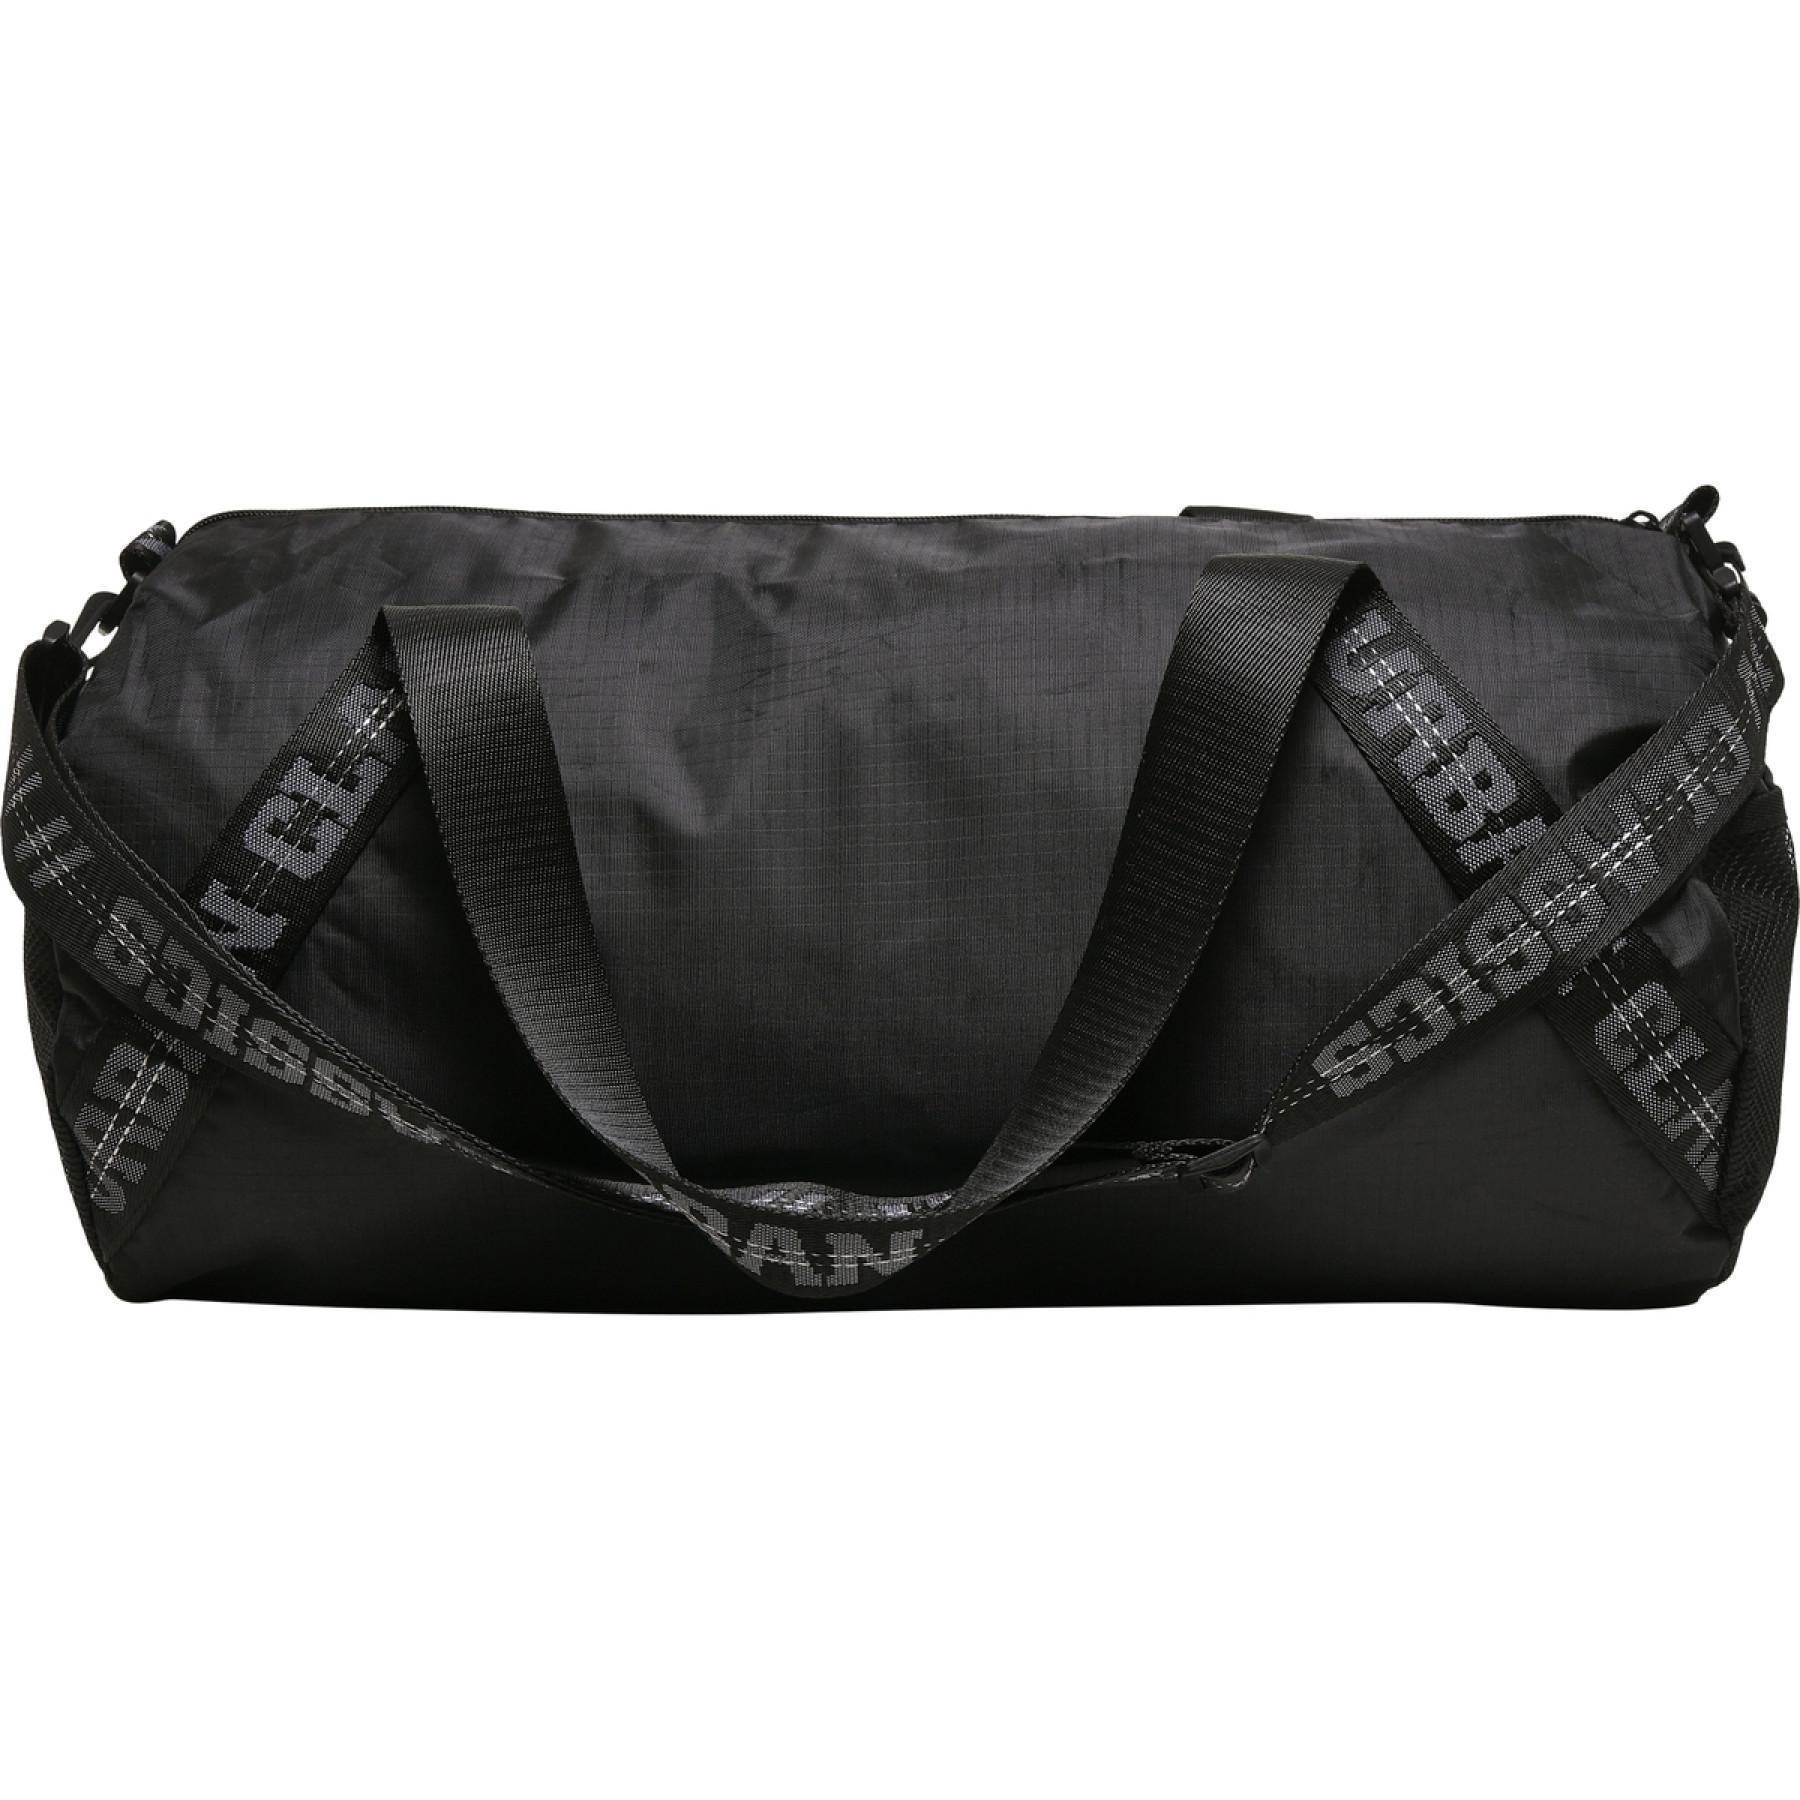 Bag Urban Classics recyclable indéchirable weekender